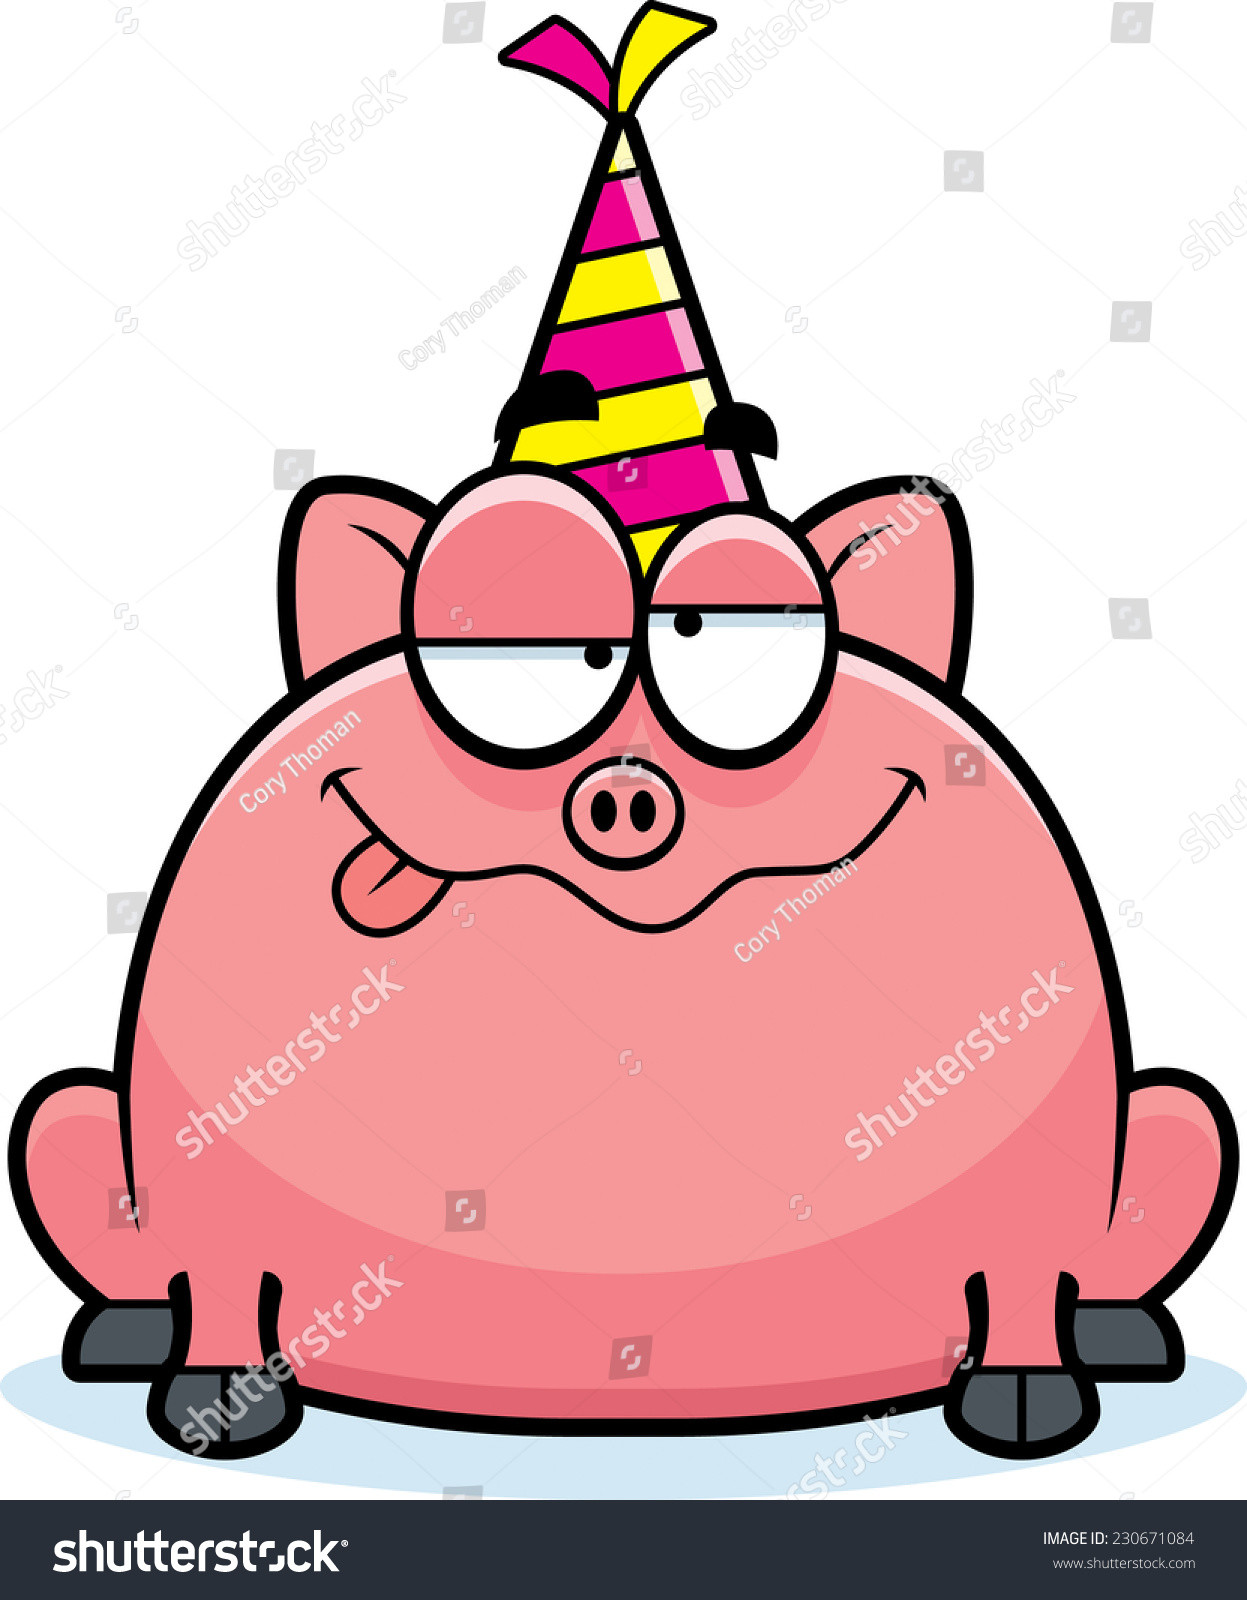 stock vector a cartoon illustration of a little pig with a party hat looking drunk